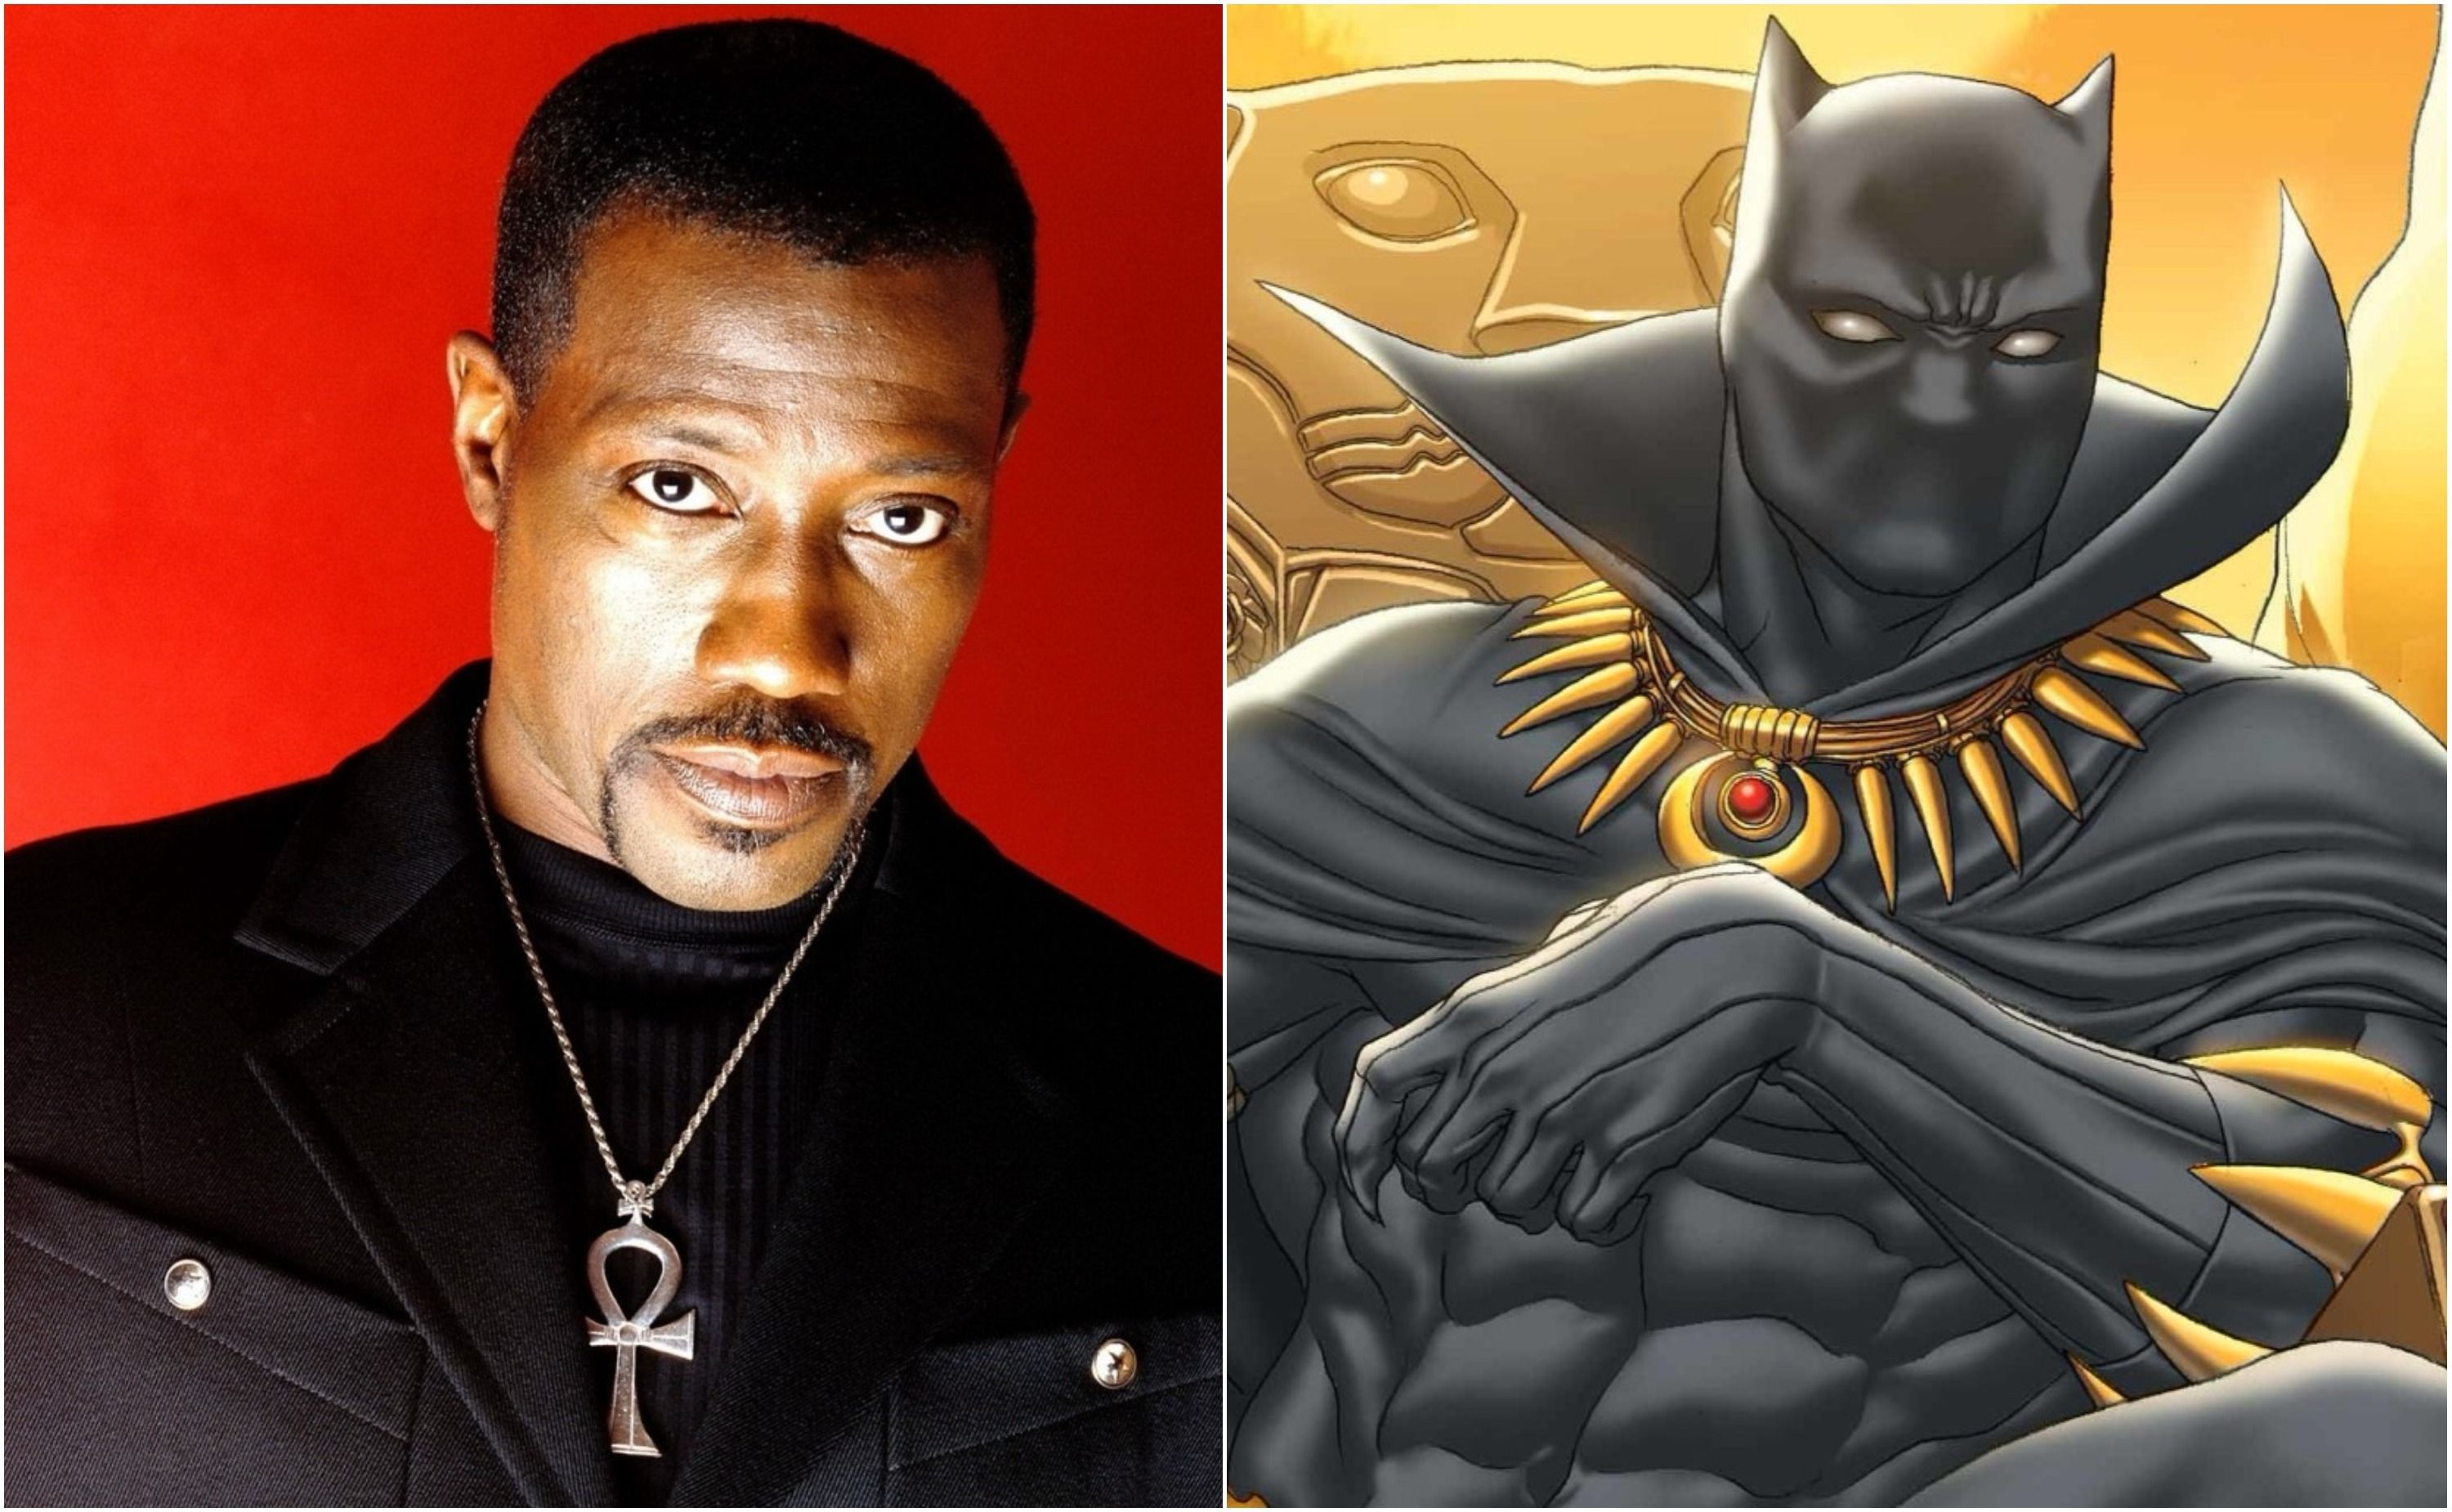 Wesley Snipes and Black Panther